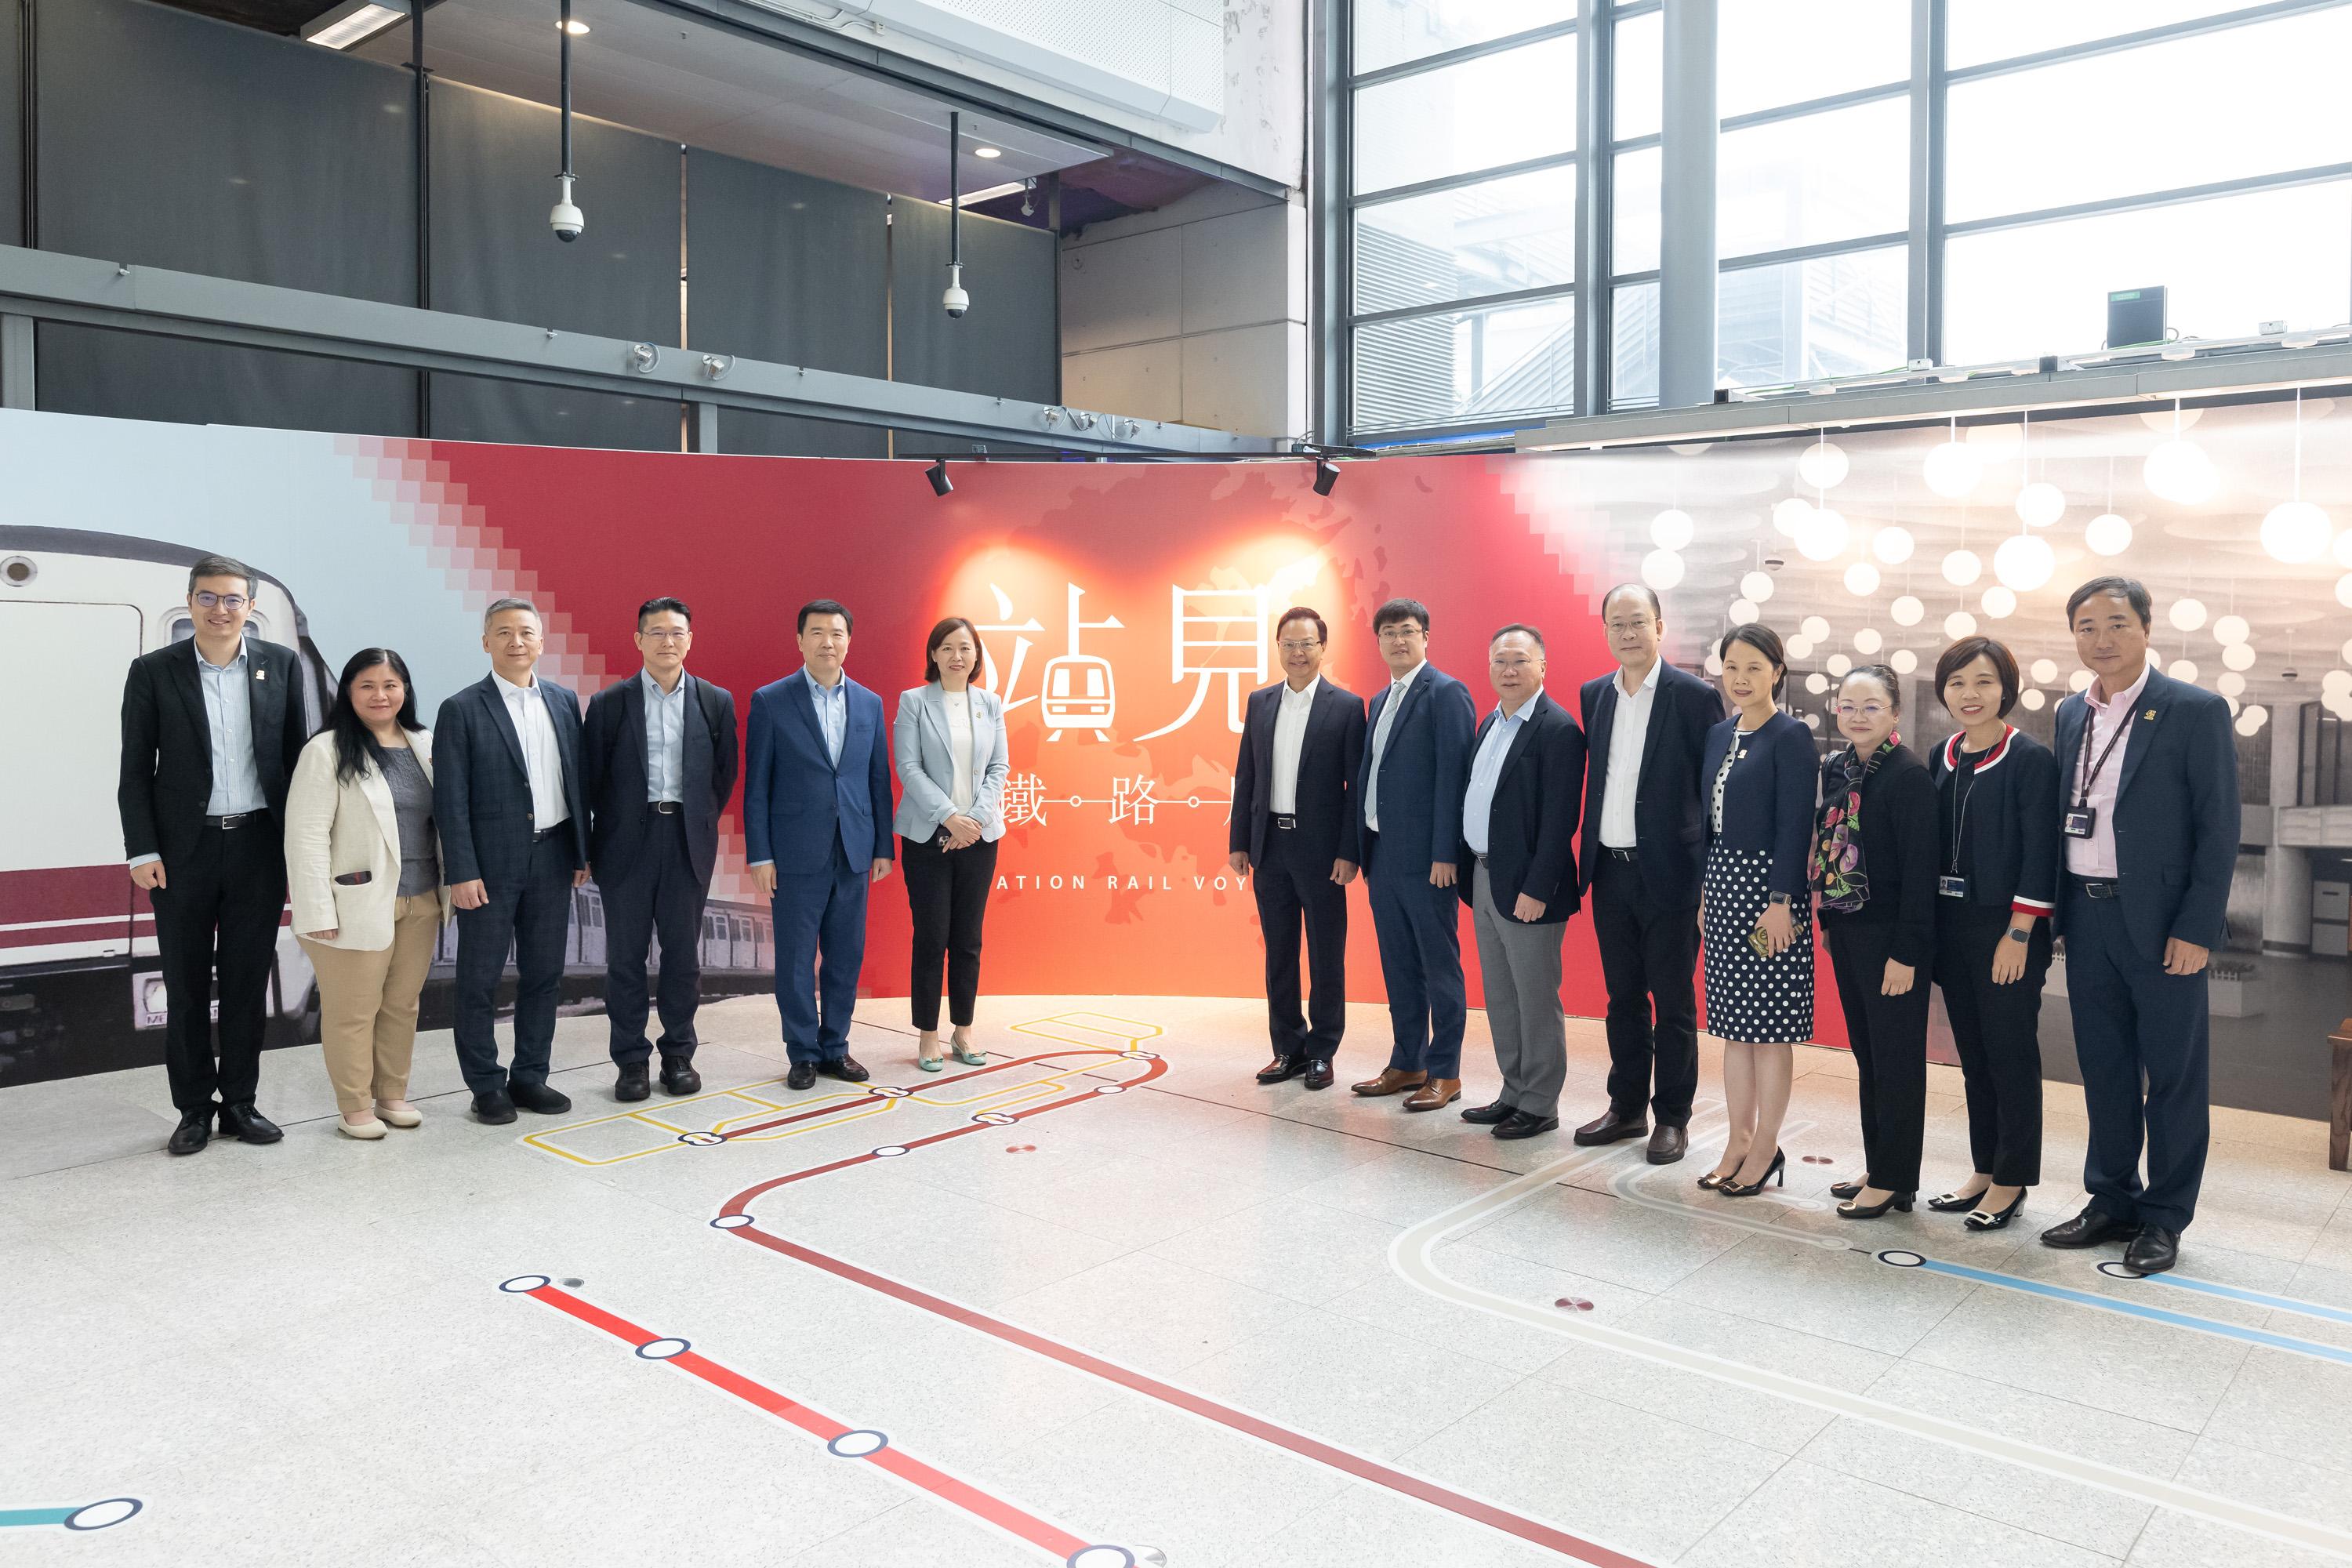 The Legislative Council (LegCo) Panel on Transport visits the "Station Rail Voyage" Exhibition of the MTR Corporation Limited at Hung Hom Station today (April 24). Photo shows LegCo Members and MTR representatives at the "Station Rail Voyage" Exhibition.